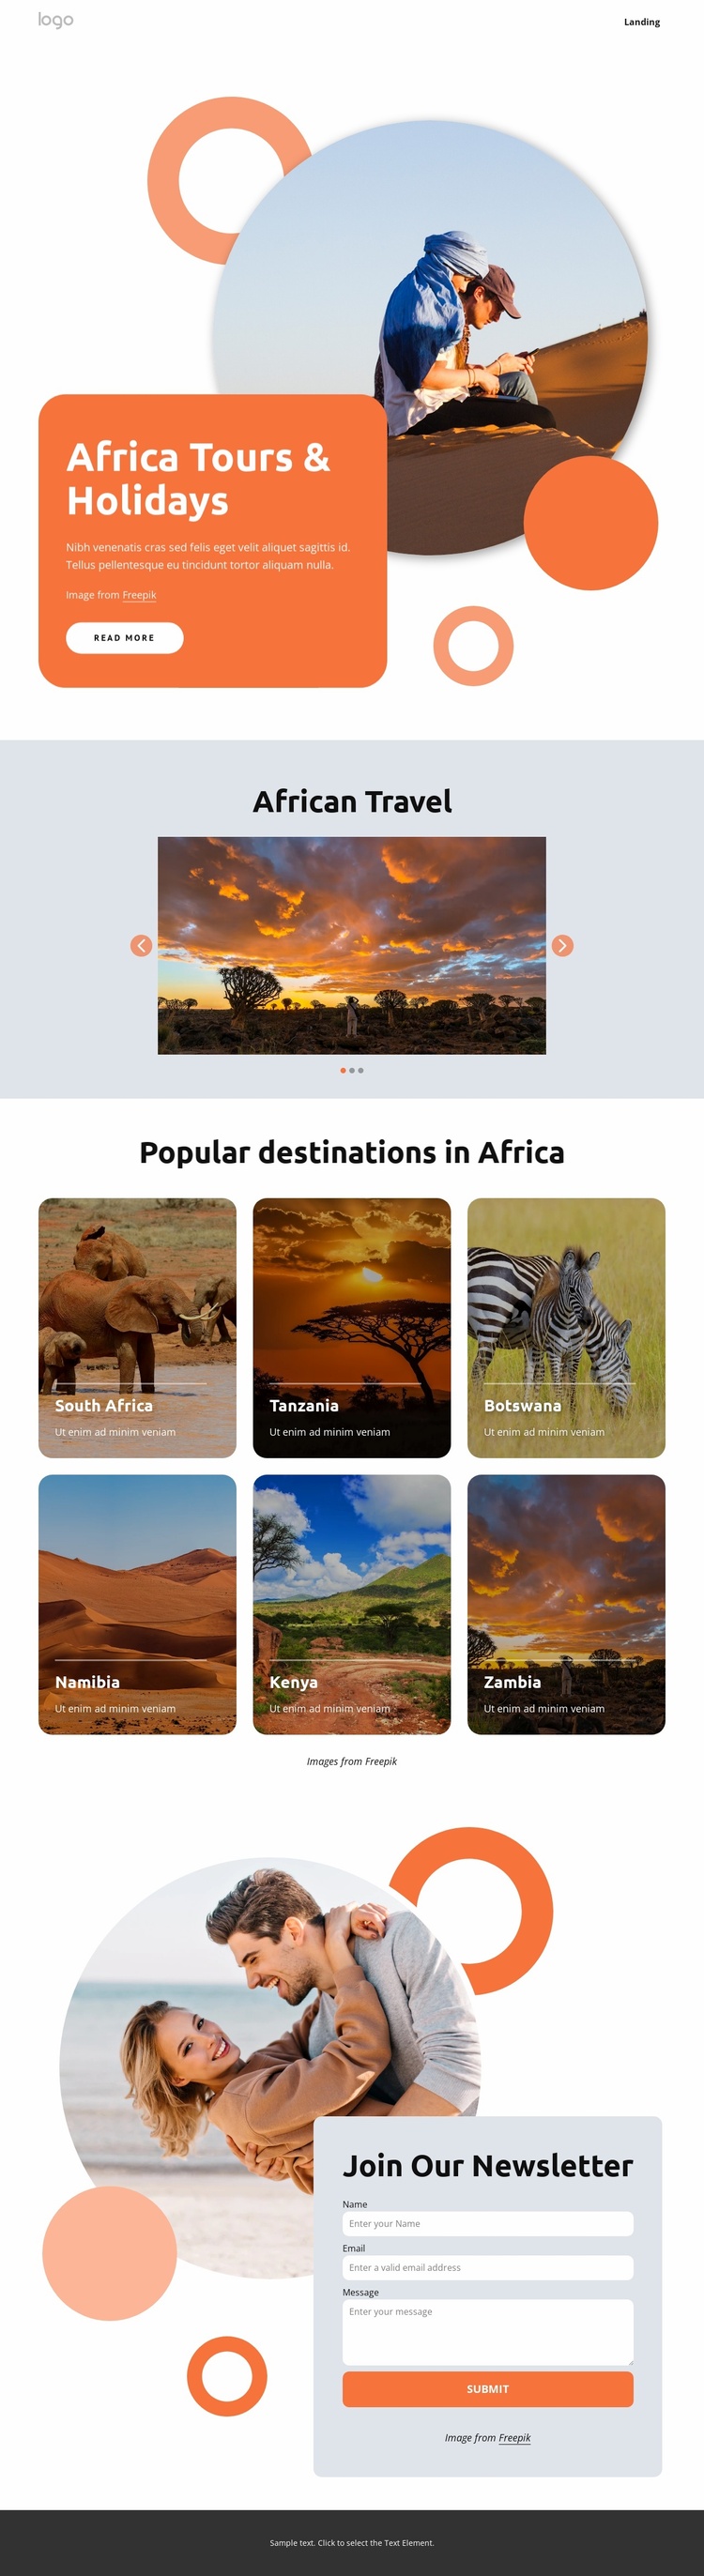 Hand-crafted African holidays Ecommerce Website Design